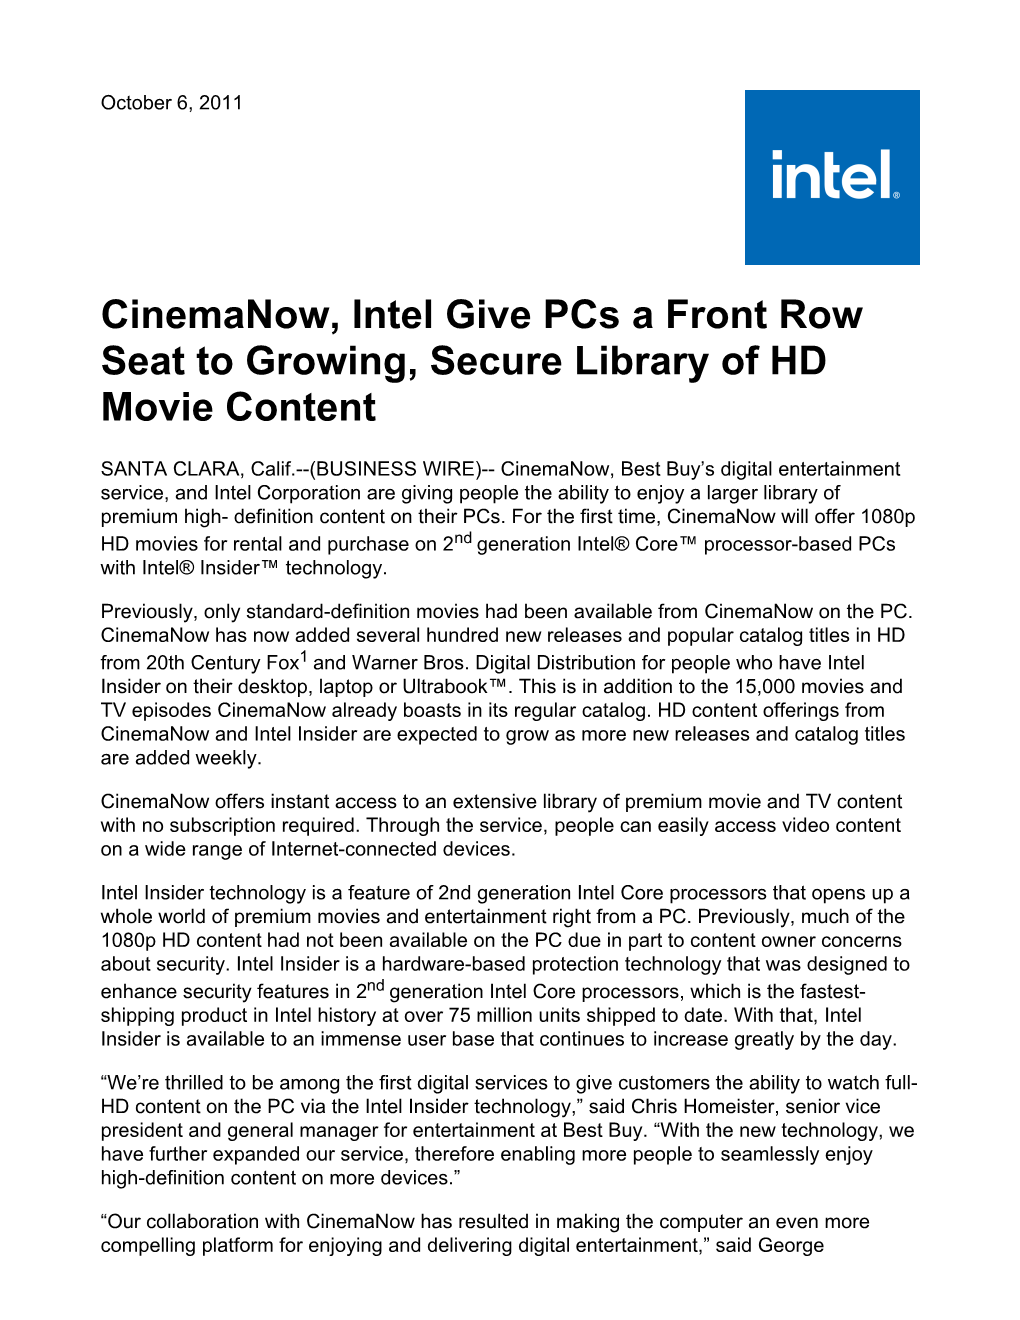 Cinemanow, Intel Give Pcs a Front Row Seat to Growing, Secure Library of HD Movie Content